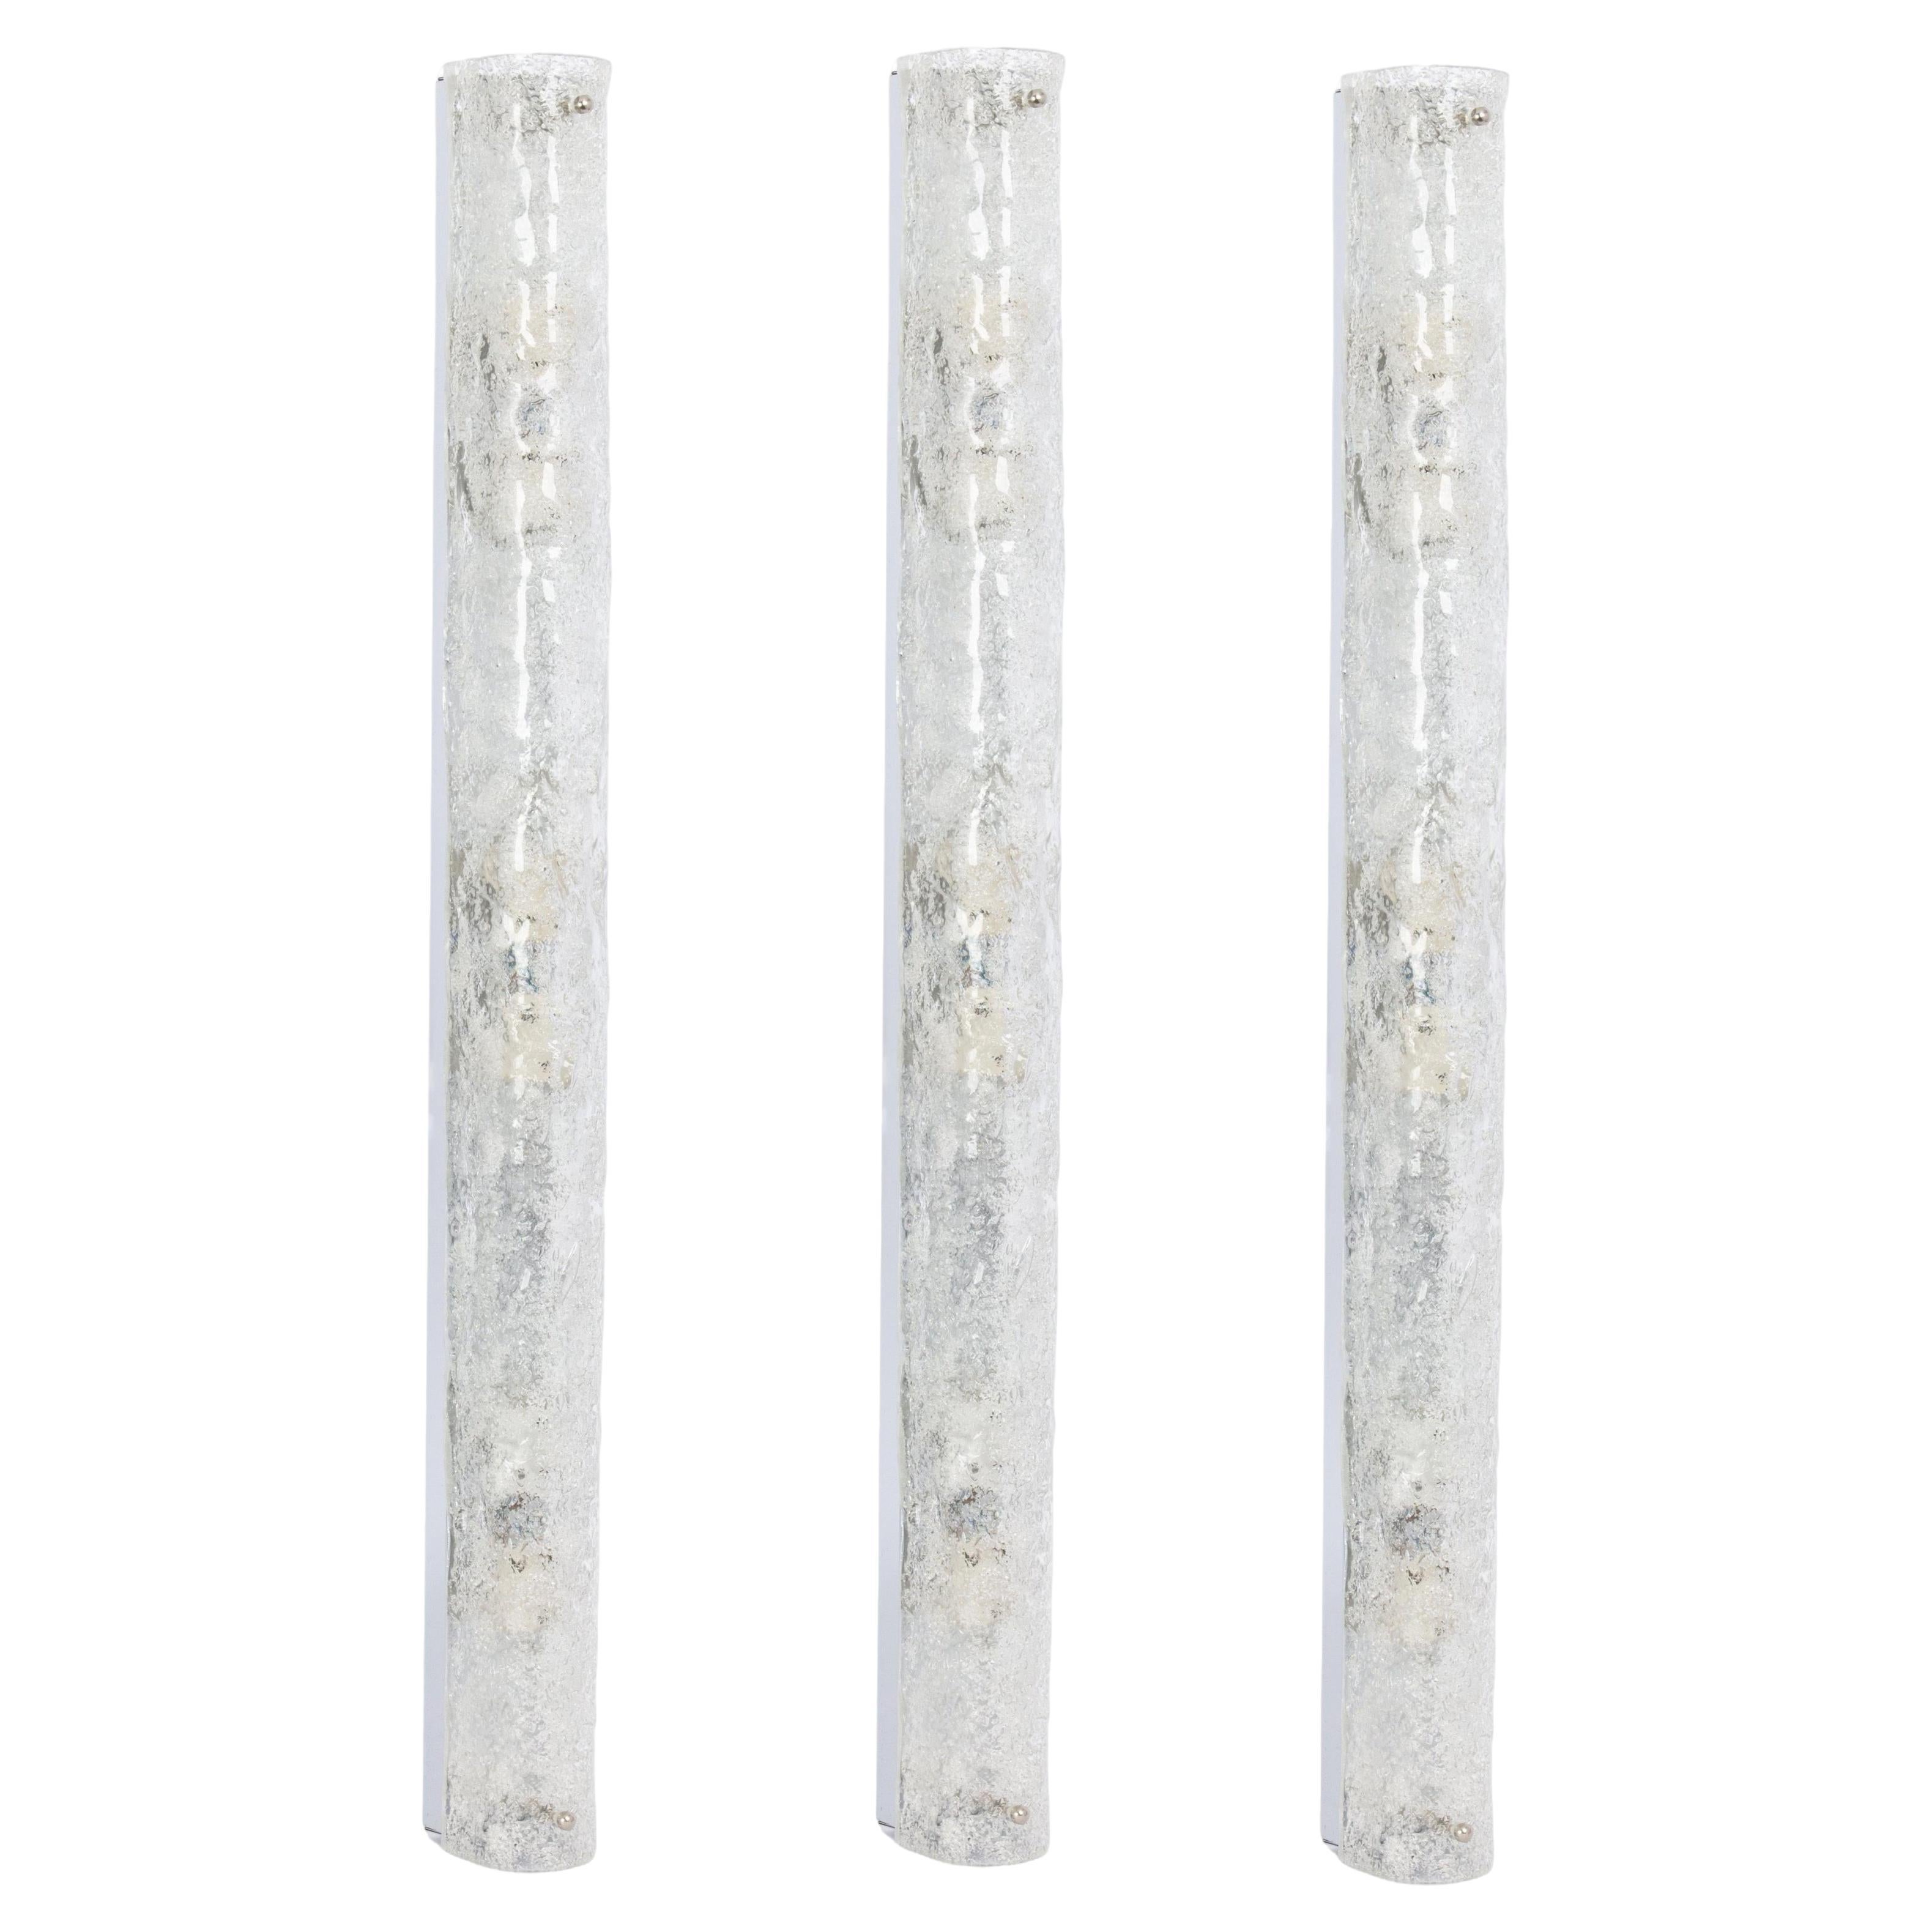 Set of 3 Extra Large Murano Ice Glass Sconces Modernist Wall Fixtures, Germany